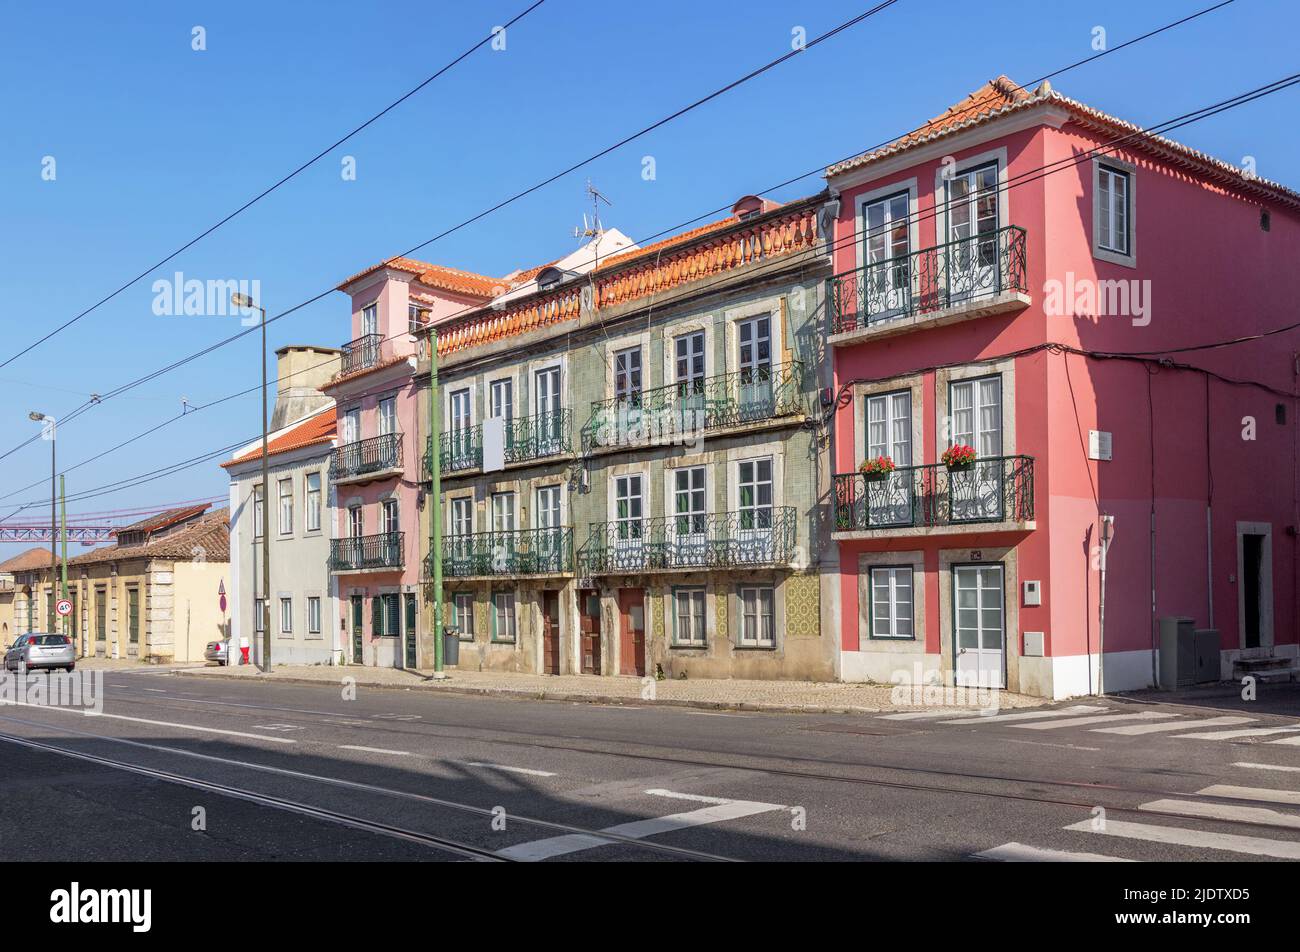 Old beautiful houses with balconies on Rua da Junqueira or Junqueira street. Lisbon, Portugal Stock Photo